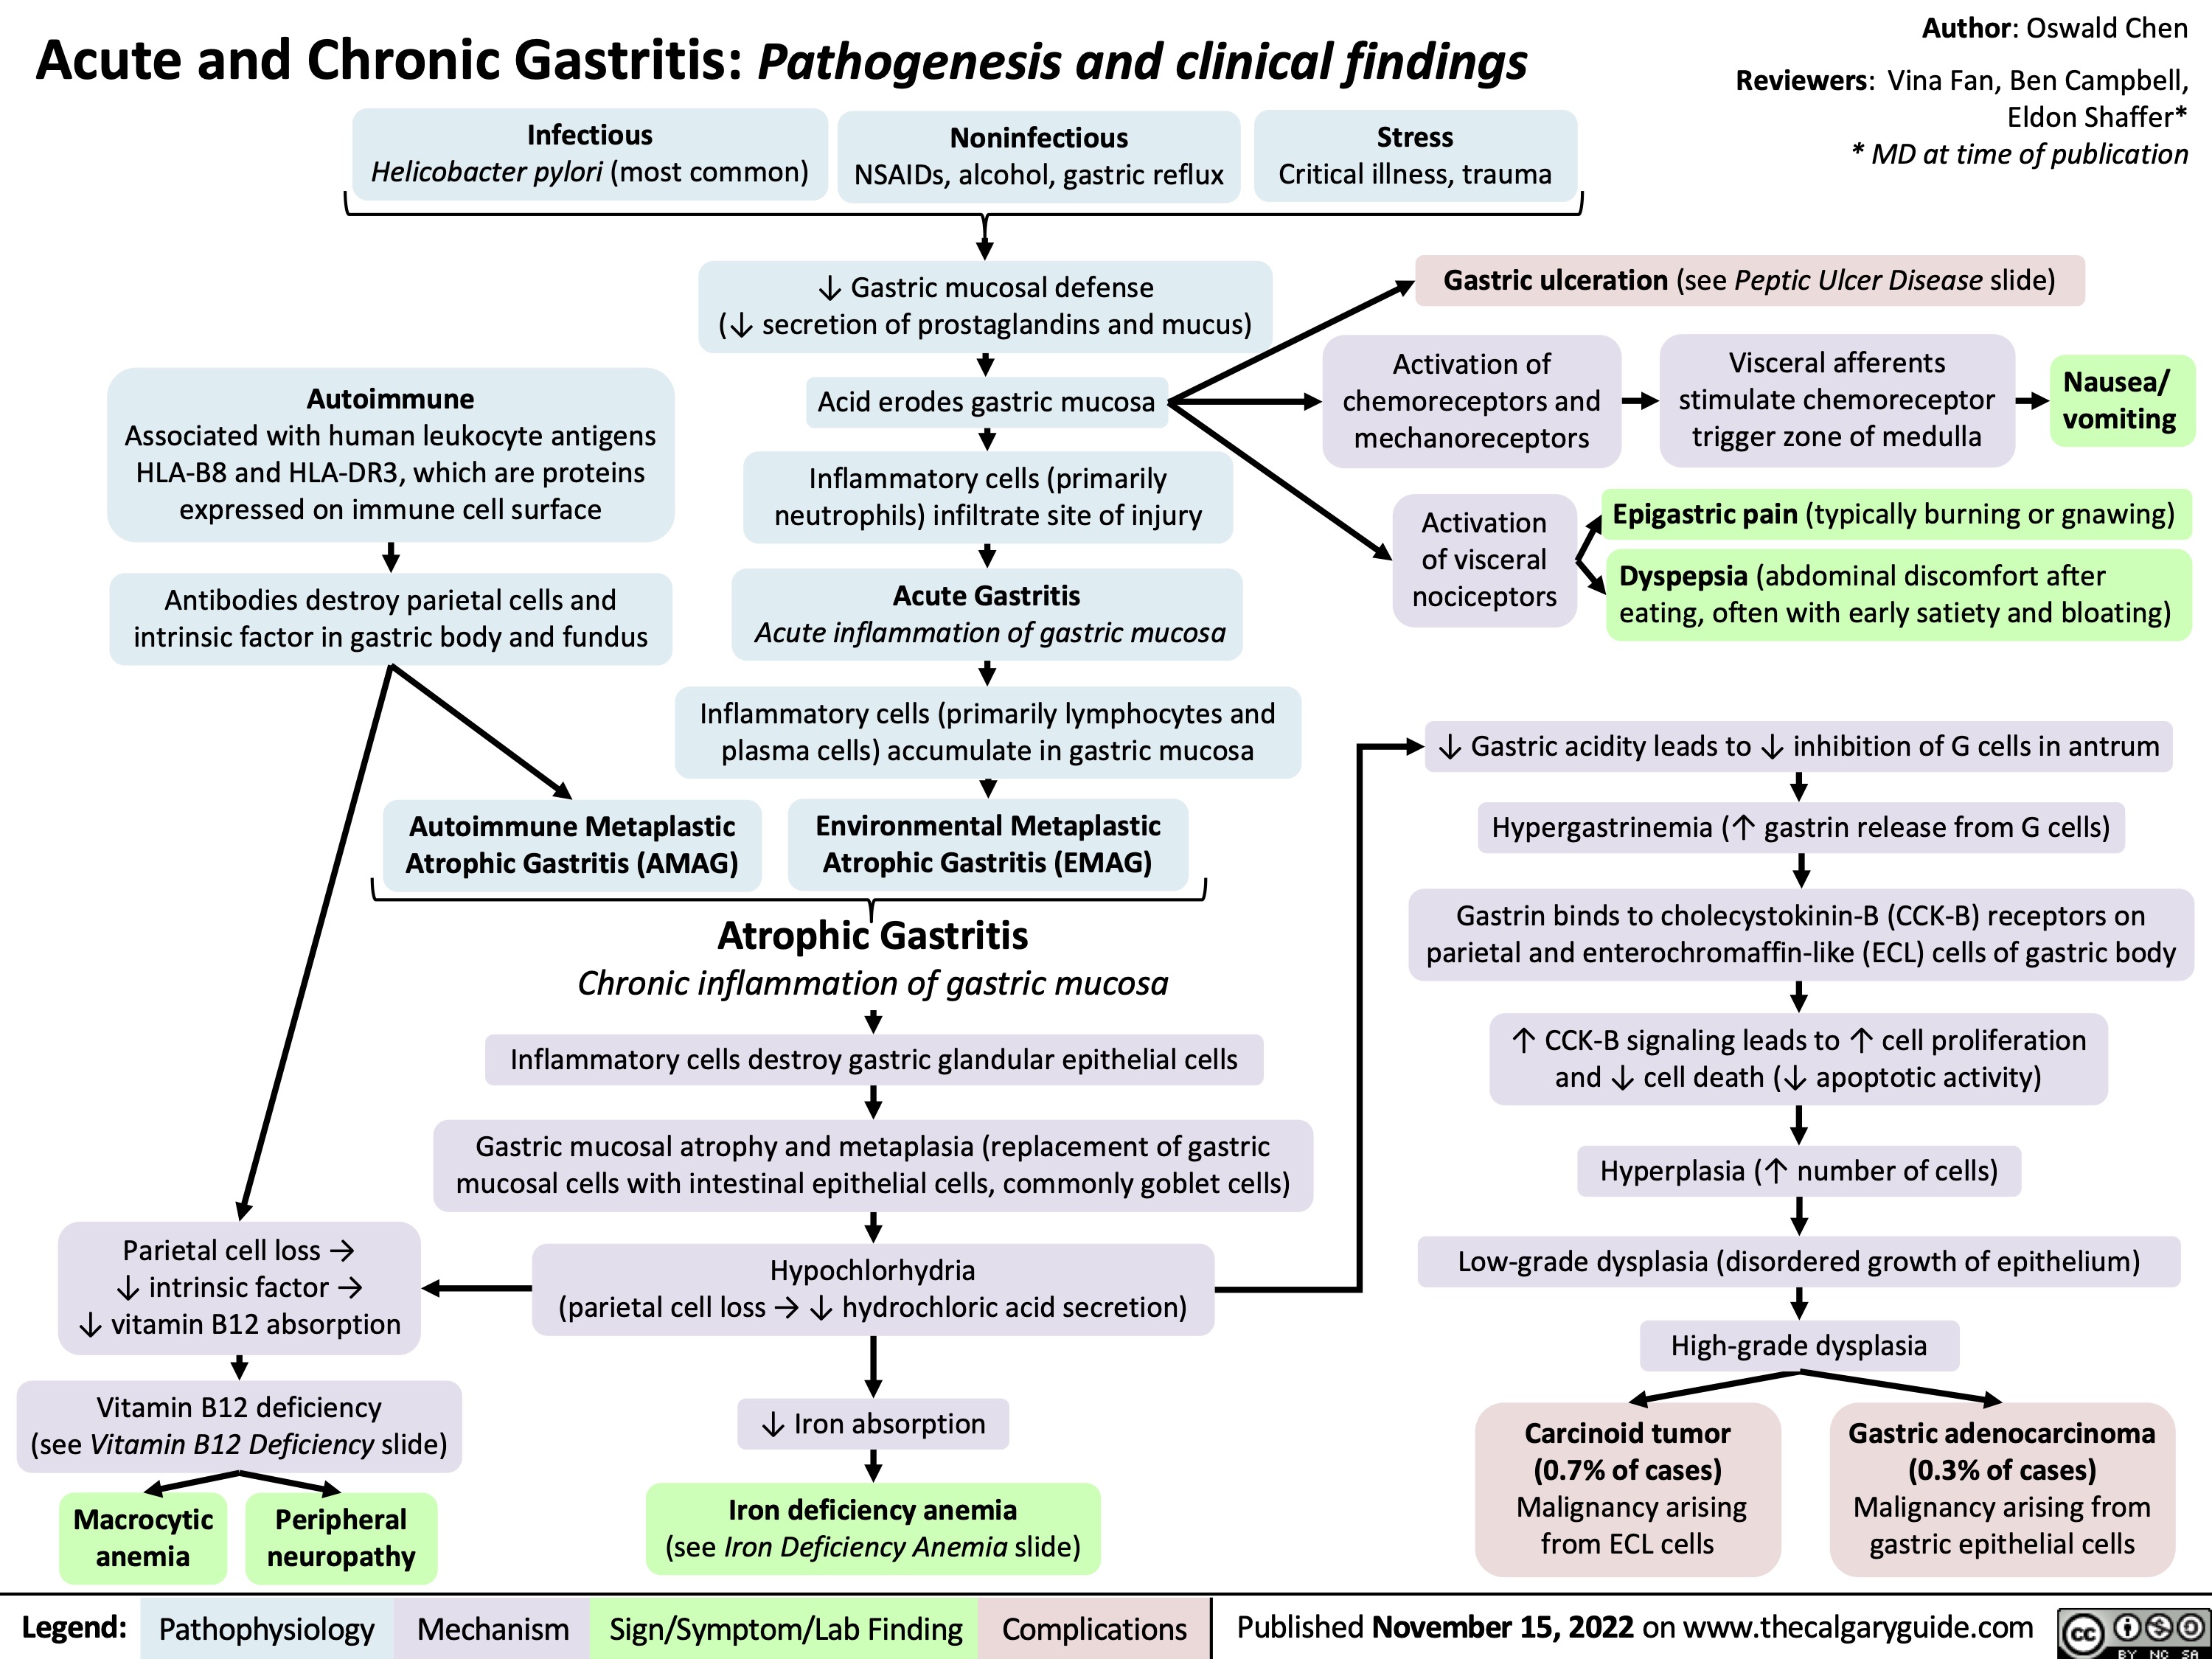 Acute and Chronic Gastritis: Pathogenesis and clinical findings
Author: Oswald Chen
Reviewers: Vina Fan, Ben Campbell, Eldon Shaffer* * MD at time of publication
   Infectious
Helicobacter pylori (most common)
Noninfectious
NSAIDs, alcohol, gastric reflux
Stress
Critical illness, trauma
Gastric ulceration (see Peptic Ulcer Disease slide)
   ↓ Gastric mucosal defense
(↓ secretion of prostaglandins and mucus)
Acid erodes gastric mucosa
Inflammatory cells (primarily neutrophils) infiltrate site of injury
Acute Gastritis
Acute inflammation of gastric mucosa
Inflammatory cells (primarily lymphocytes and plasma cells) accumulate in gastric mucosa
Autoimmune Metaplastic Environmental Metaplastic Atrophic Gastritis (AMAG) Atrophic Gastritis (EMAG)
Atrophic Gastritis
Chronic inflammation of gastric mucosa
Inflammatory cells destroy gastric glandular epithelial cells
Gastric mucosal atrophy and metaplasia (replacement of gastric mucosal cells with intestinal epithelial cells, commonly goblet cells)
Hypochlorhydria
(parietal cell loss → ↓ hydrochloric acid secretion)
↓ Iron absorption
Iron deficiency anemia
(see Iron Deficiency Anemia slide)
Activation of chemoreceptors and mechanoreceptors
Activation
of visceral nociceptors
Visceral afferents stimulate chemoreceptor trigger zone of medulla
Nausea/ vomiting
      Autoimmune
Associated with human leukocyte antigens HLA-B8 and HLA-DR3, which are proteins expressed on immune cell surface
Antibodies destroy parietal cells and intrinsic factor in gastric body and fundus
Epigastric pain (typically burning or gnawing) Dyspepsia (abdominal discomfort after
eating, often with early satiety and bloating)
                      Parietal cell loss →
↓ intrinsic factor →
↓ vitamin B12 absorption
Vitamin B12 deficiency
(see Vitamin B12 Deficiency slide)
Macrocytic Peripheral anemia neuropathy
↓ Gastric acidity leads to ↓ inhibition of G cells in antrum Hypergastrinemia (↑ gastrin release from G cells)
Gastrin binds to cholecystokinin-B (CCK-B) receptors on parietal and enterochromaffin-like (ECL) cells of gastric body
↑ CCK-B signaling leads to ↑ cell proliferation and ↓ cell death (↓ apoptotic activity)
Hyperplasia (↑ number of cells)
Low-grade dysplasia (disordered growth of epithelium) High-grade dysplasia
          Carcinoid tumor (0.7% of cases) Malignancy arising from ECL cells
Gastric adenocarcinoma (0.3% of cases) Malignancy arising from gastric epithelial cells
    Legend:
 Pathophysiology
Mechanism
Sign/Symptom/Lab Finding
 Complications
Published November 15, 2022 on www.thecalgaryguide.com
    